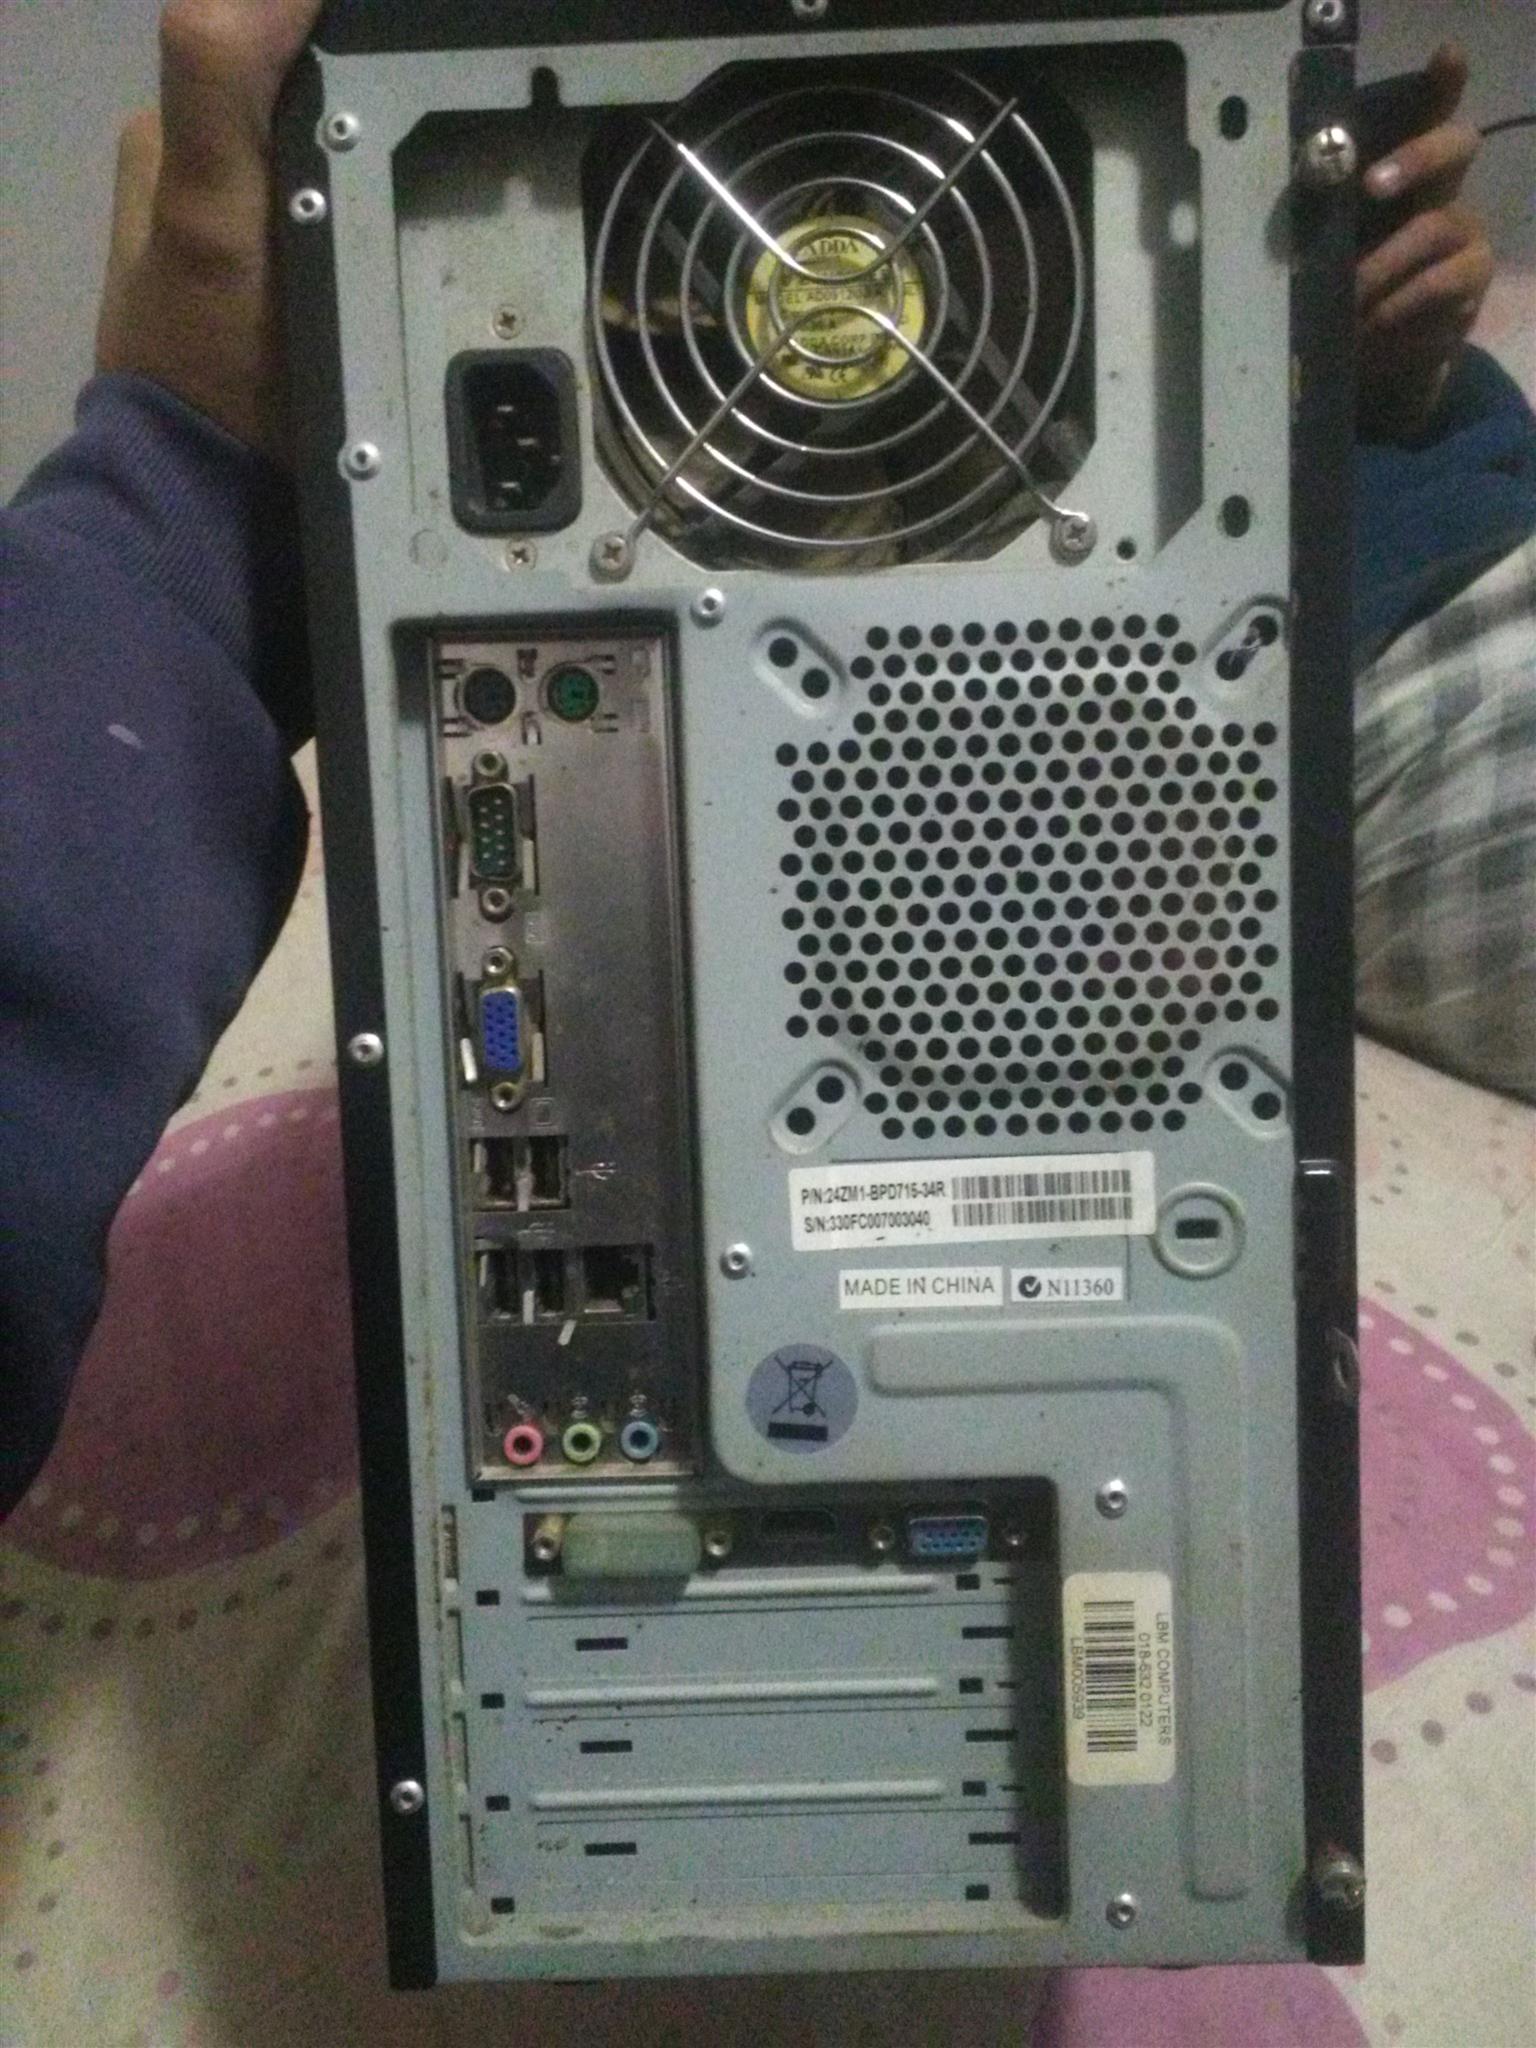 Computer tower